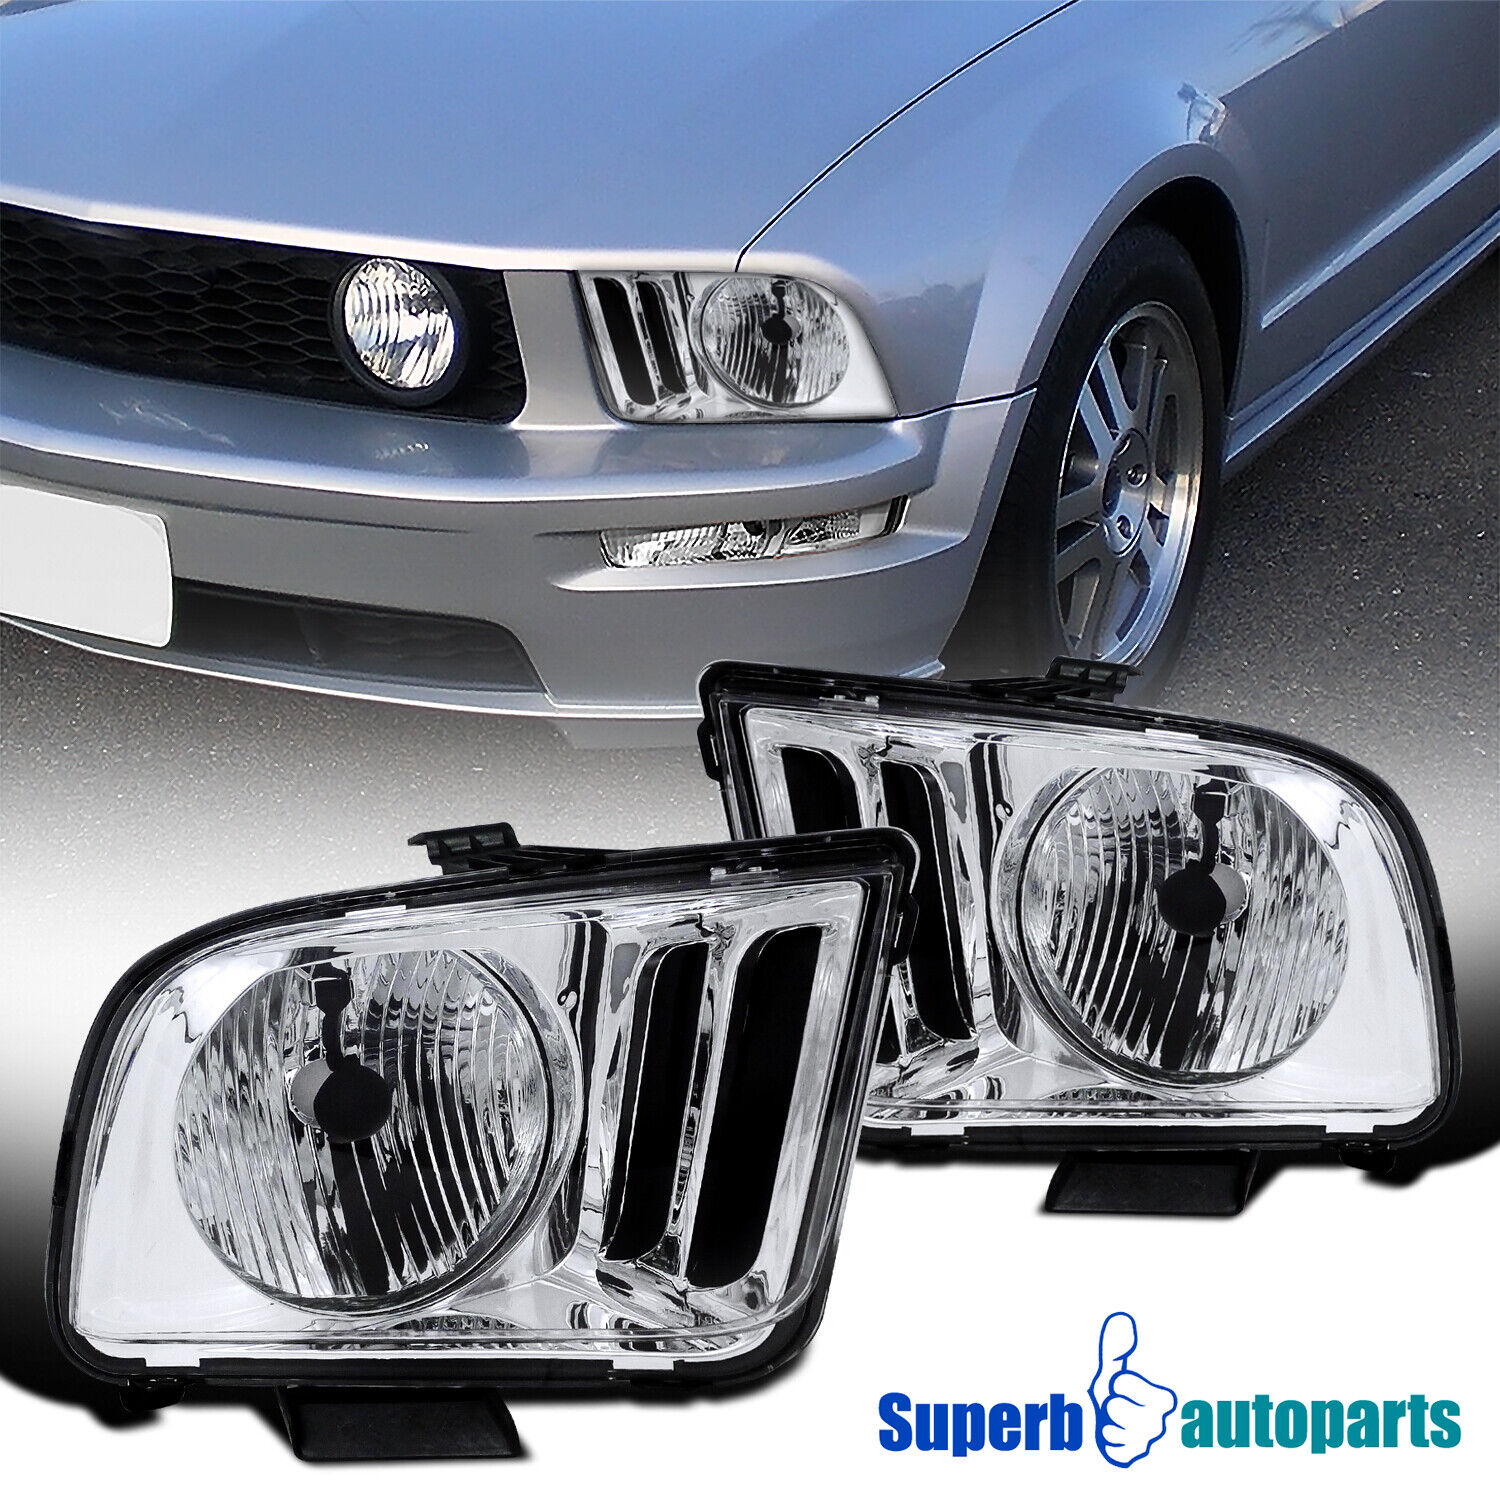 Fits 2005-2009 Ford Mustang GT500 GT500KR Headlights Head Lamps Left+Right 05-09